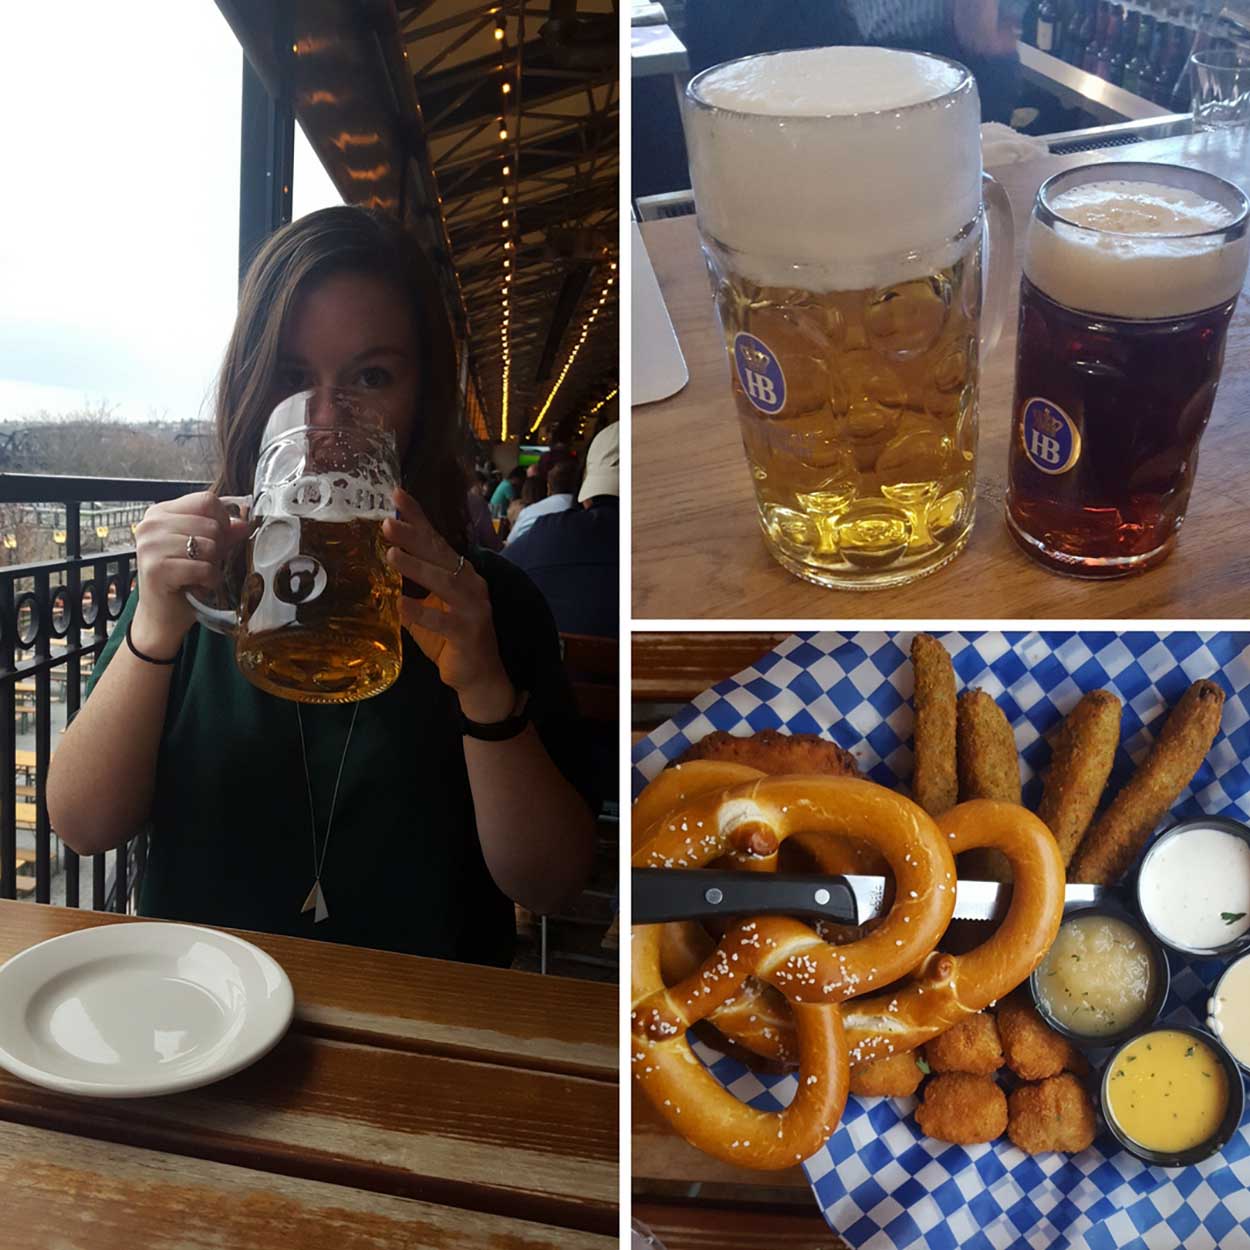 Alyssa drinking a beer, and a platter from Hofbräuhaus